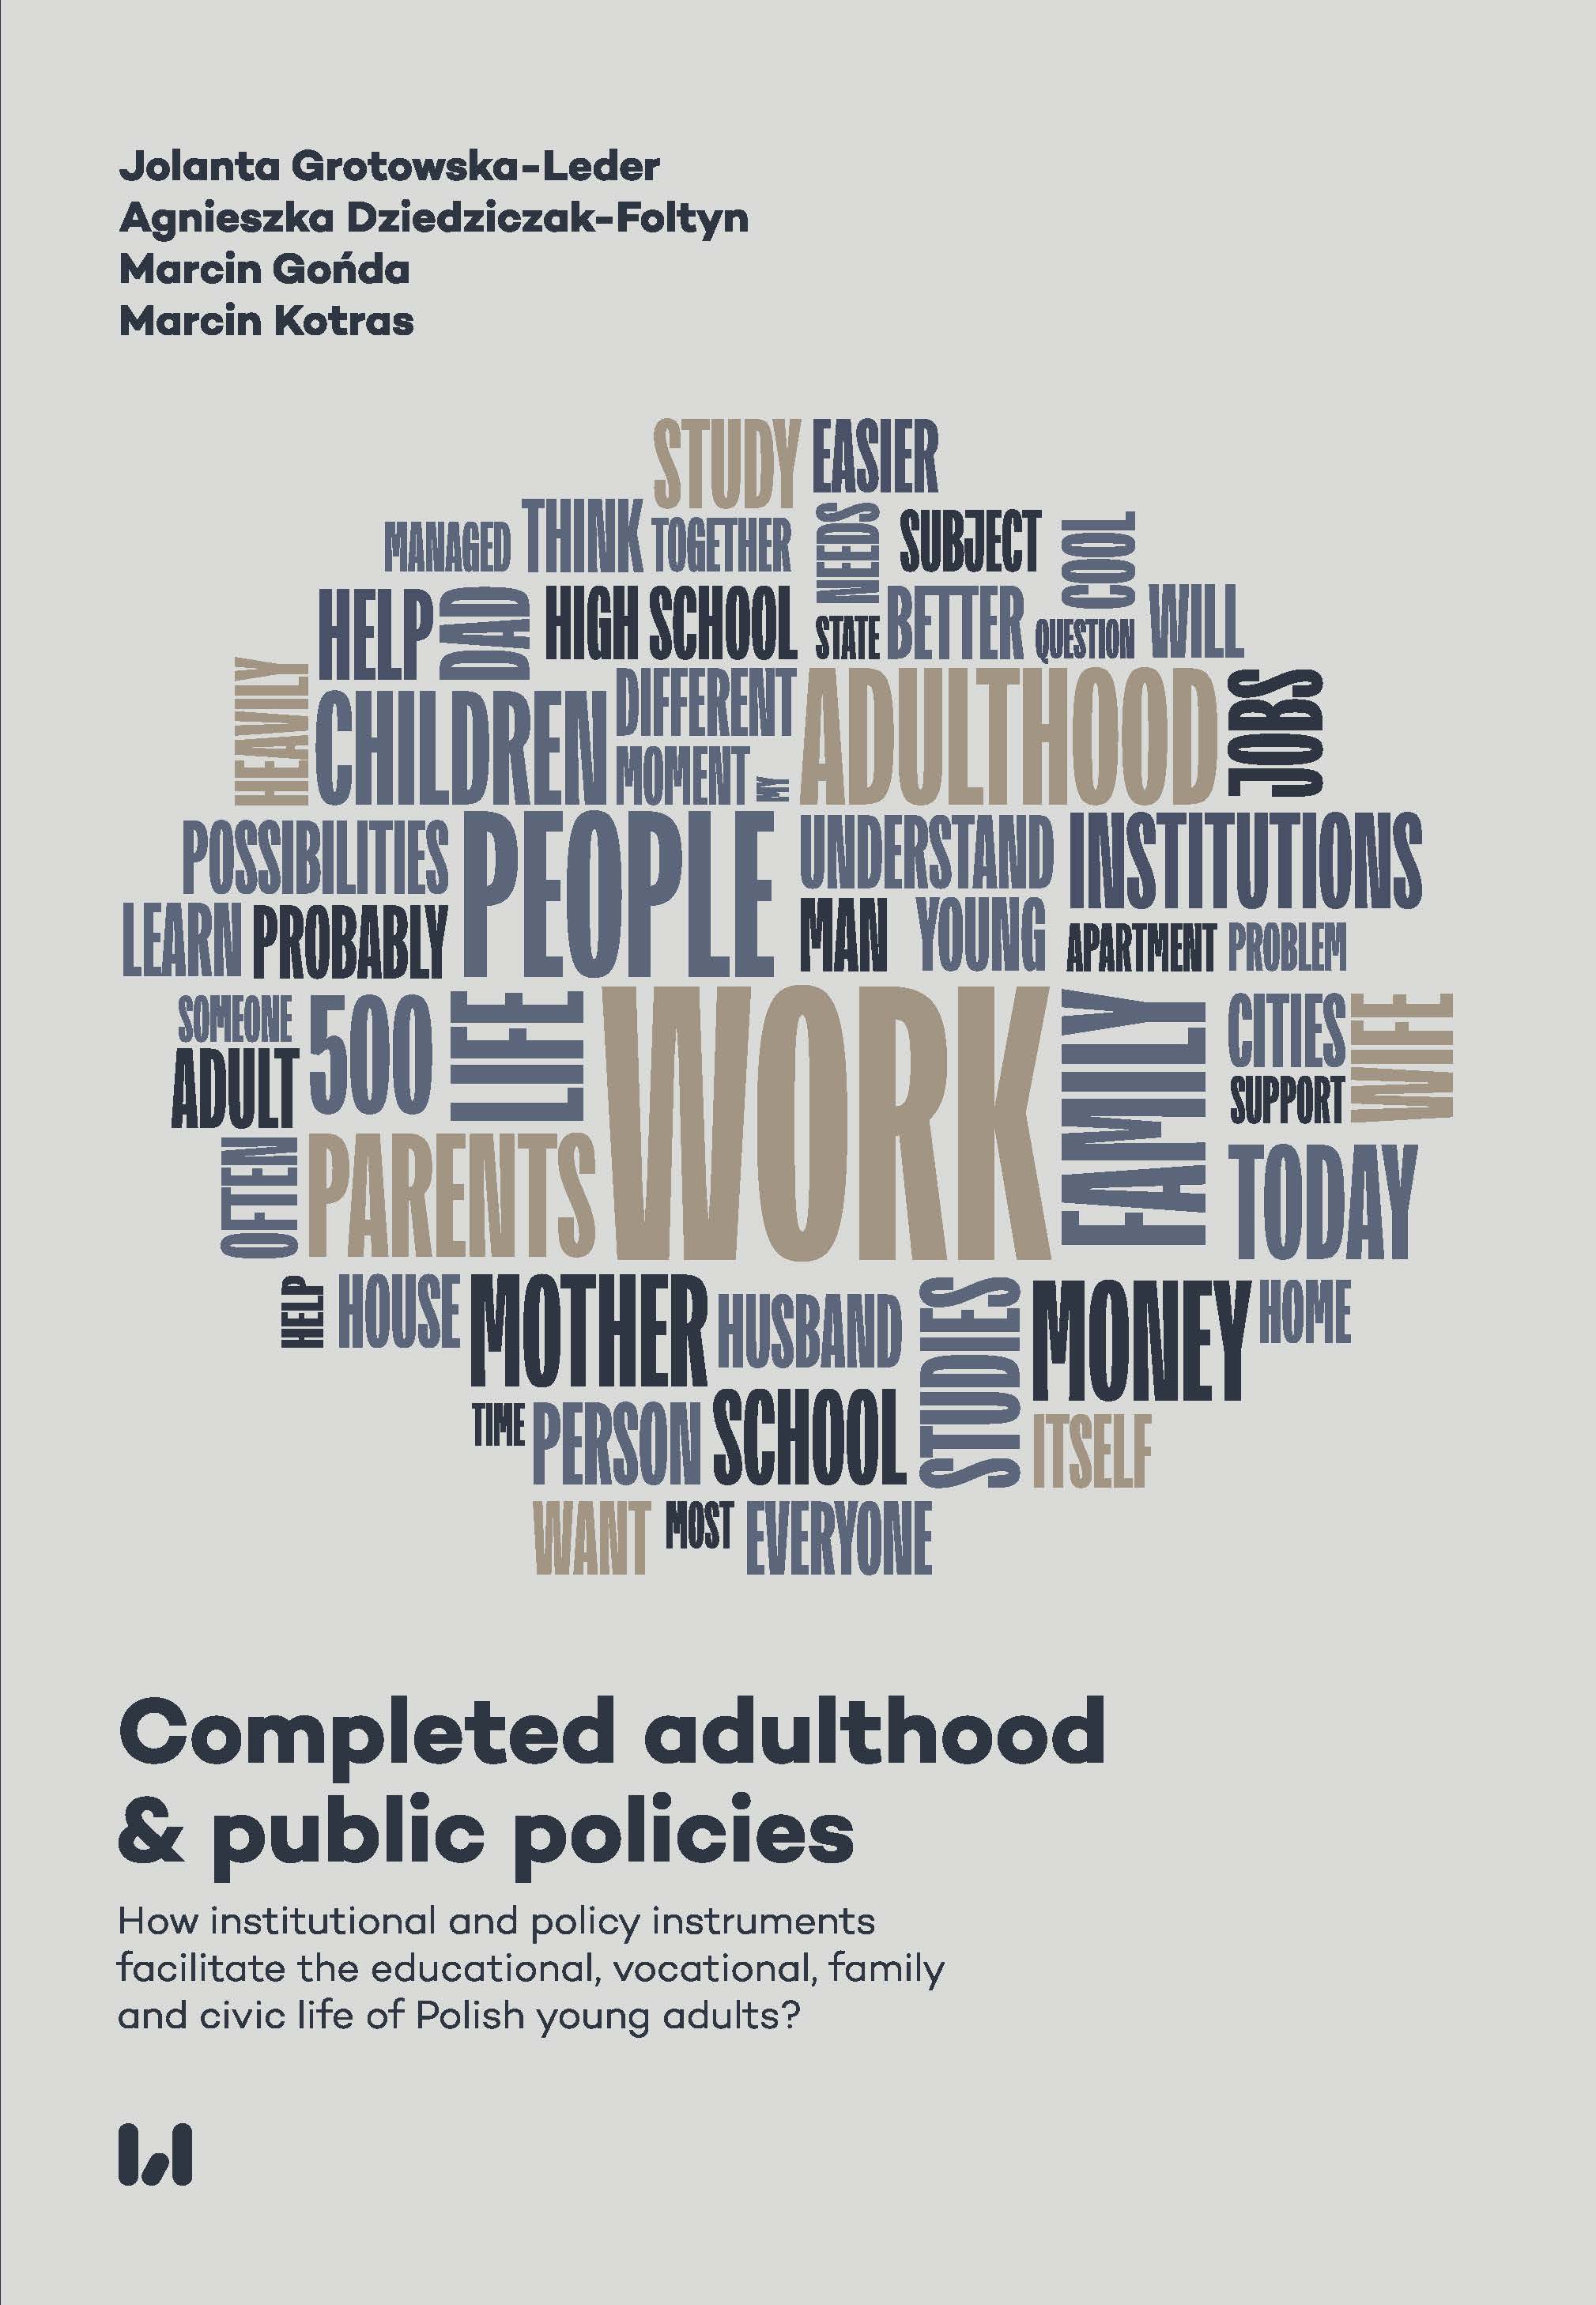 Completed adulthood & public policies. How institutional and policy instruments facilitate the educational, vocational, family and civic life of Polish young adults? Cover Image